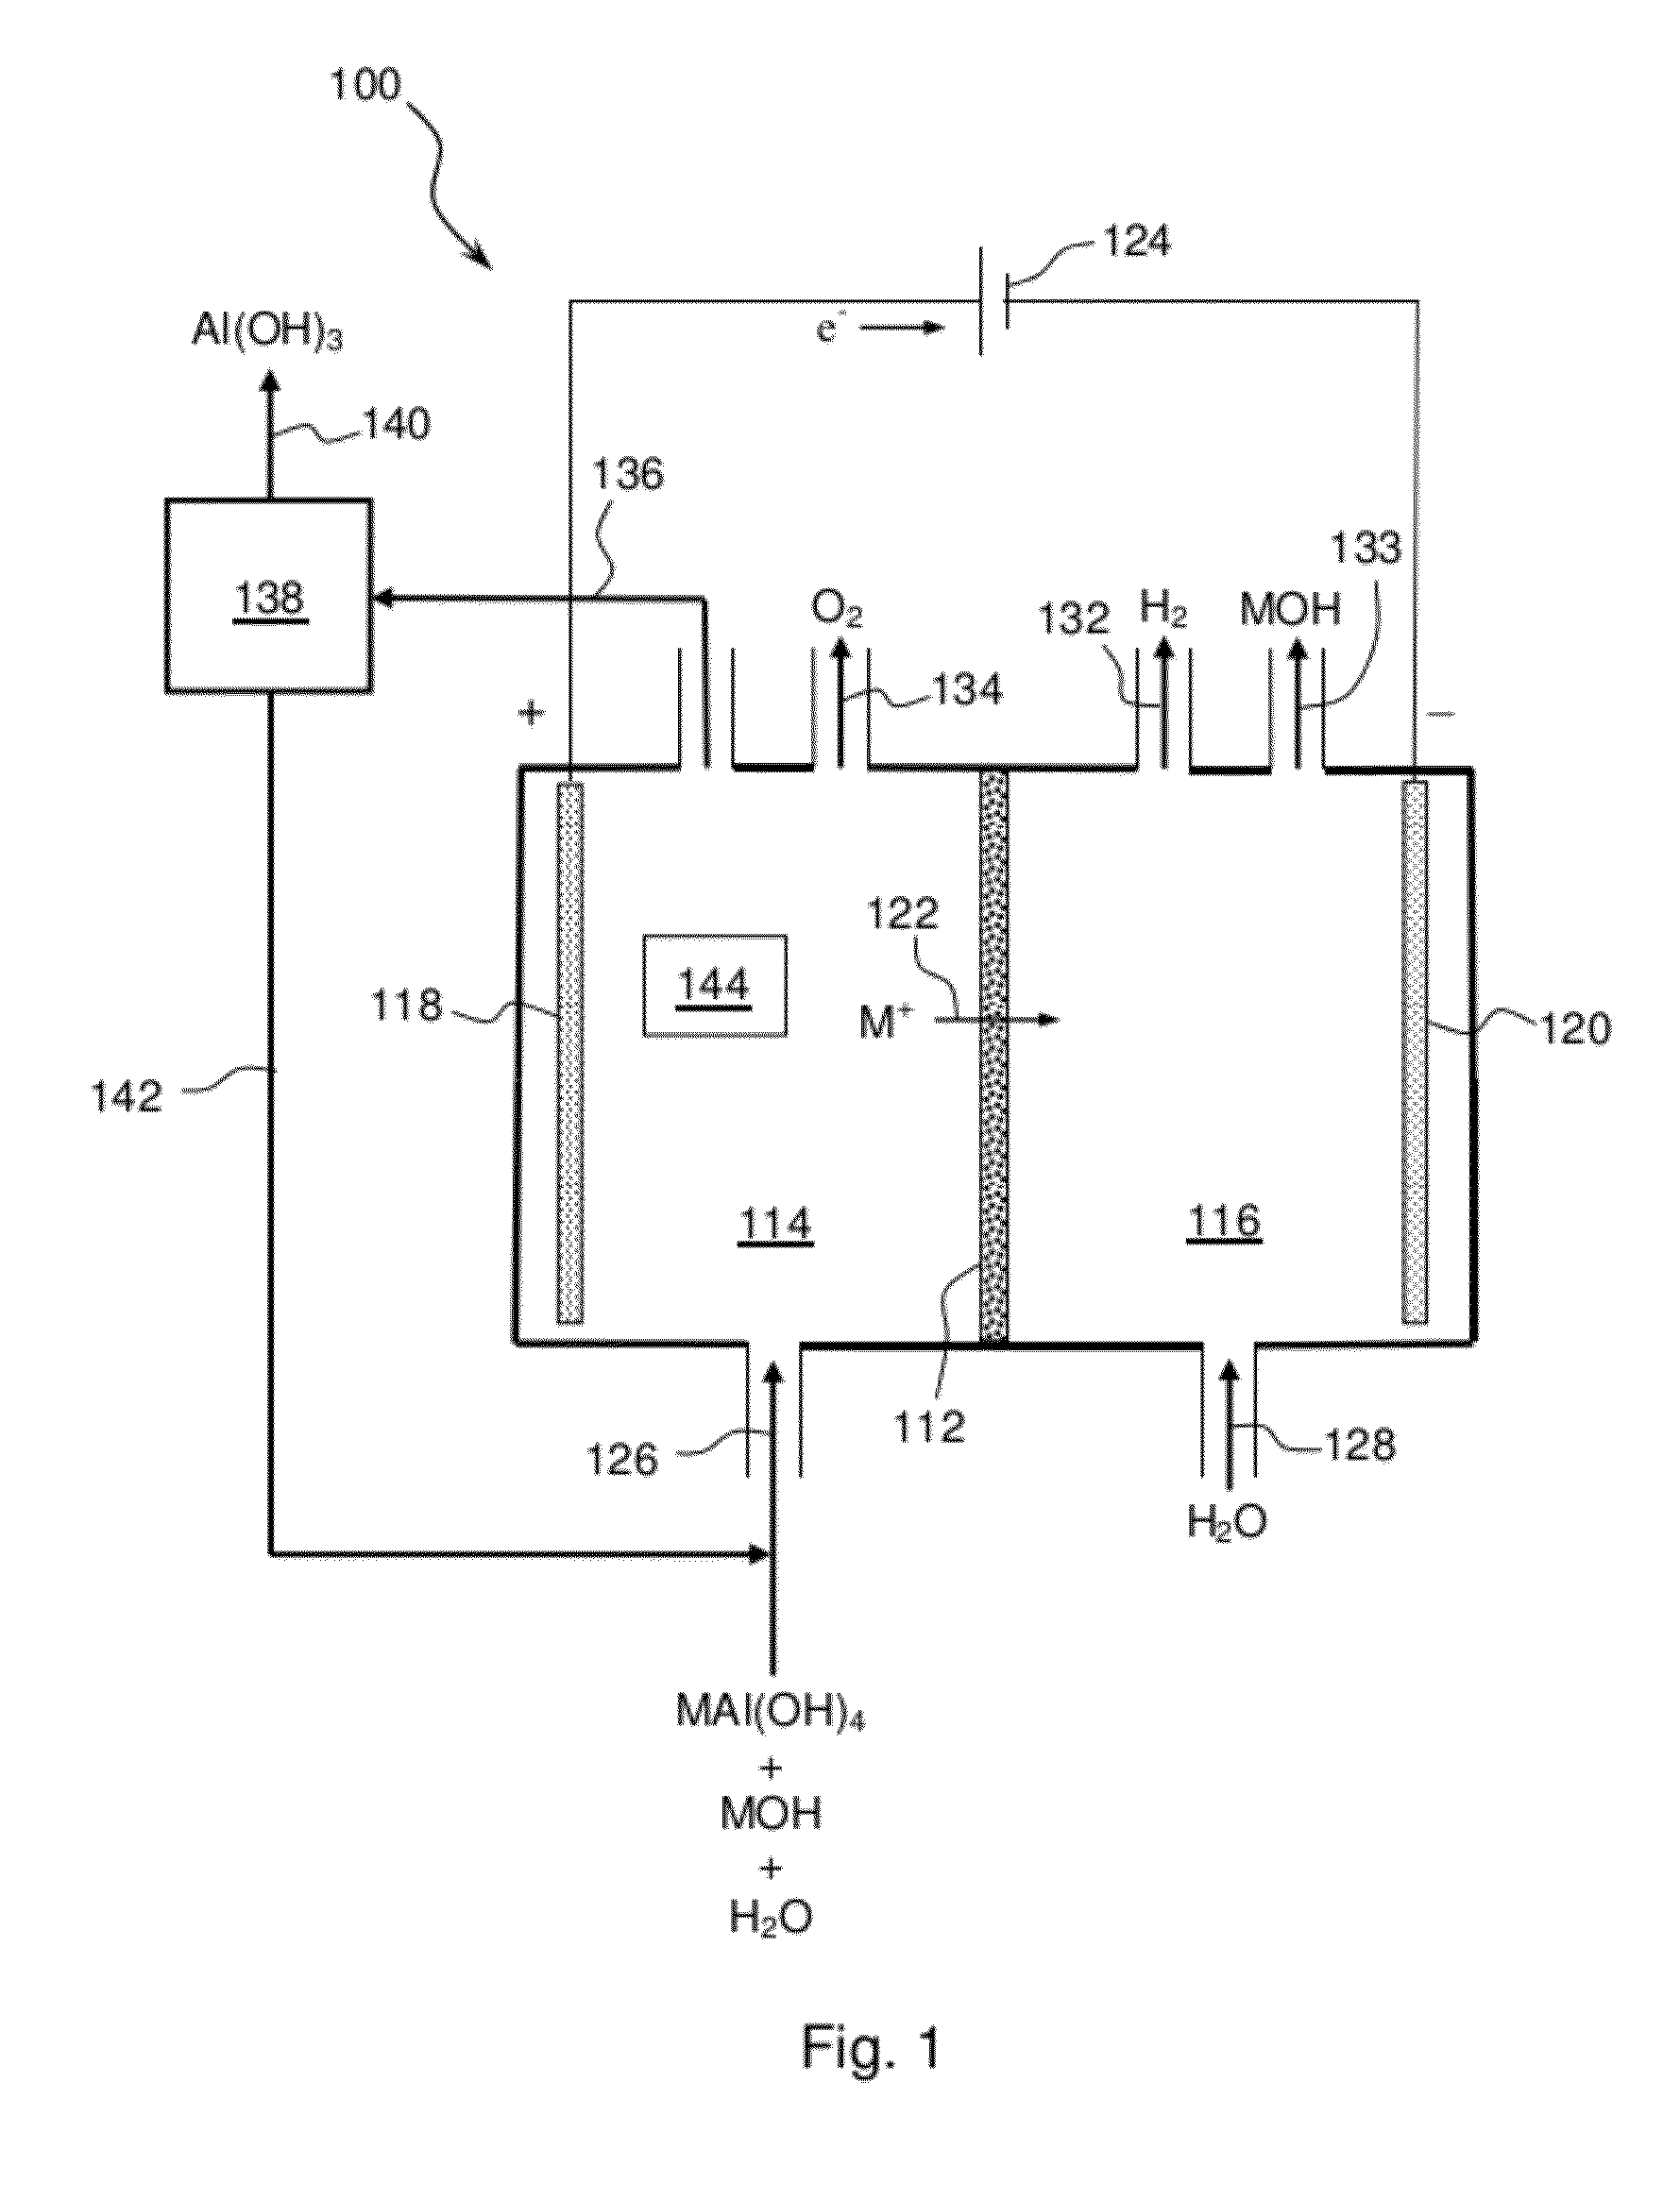 Electrolytic process to produce aluminum hydroxide